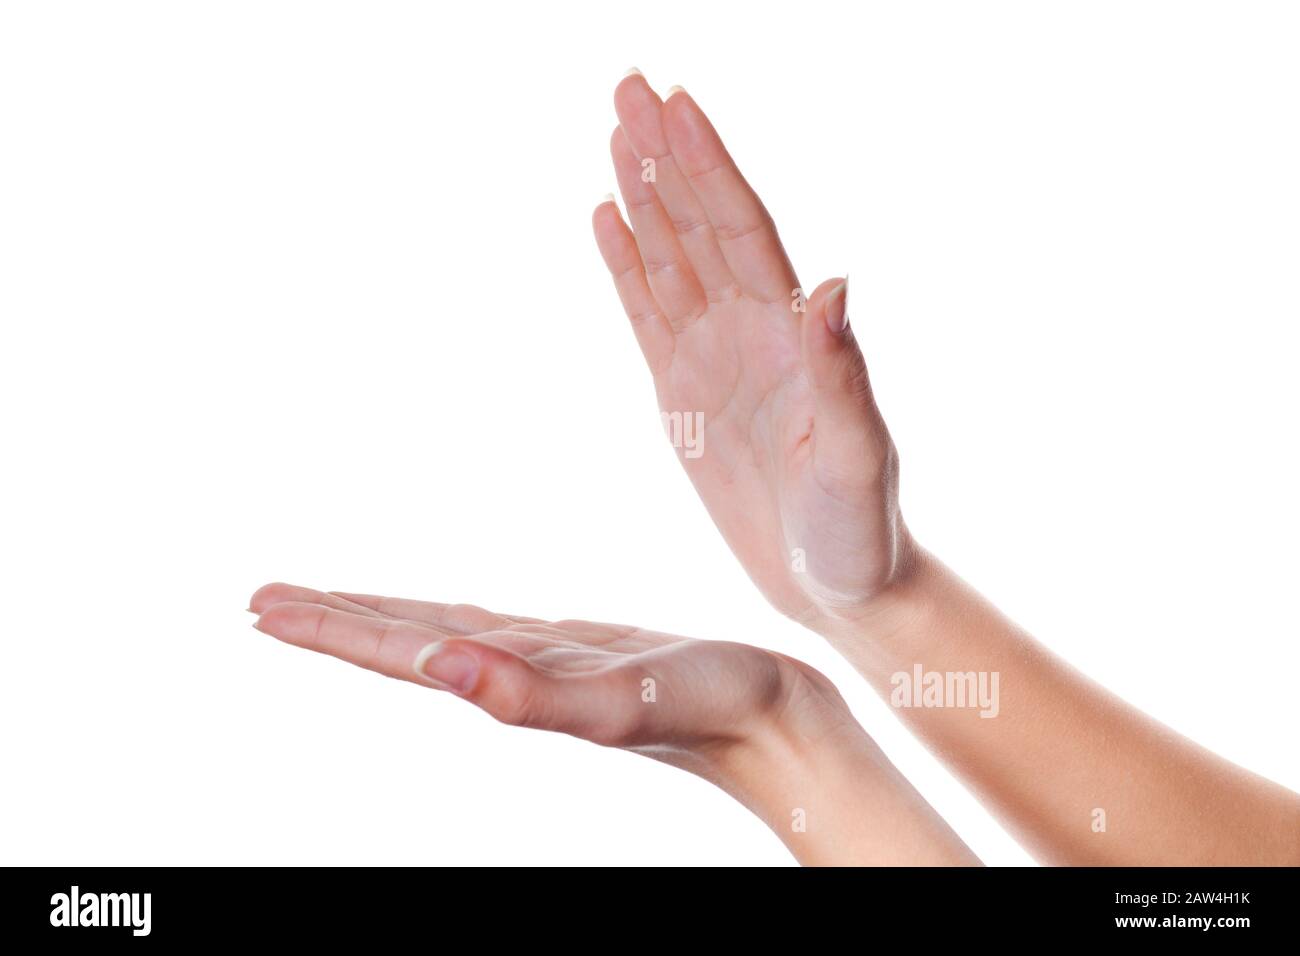 Clapping. beautiful female hands isolated on white background giving applause. Stock Photo